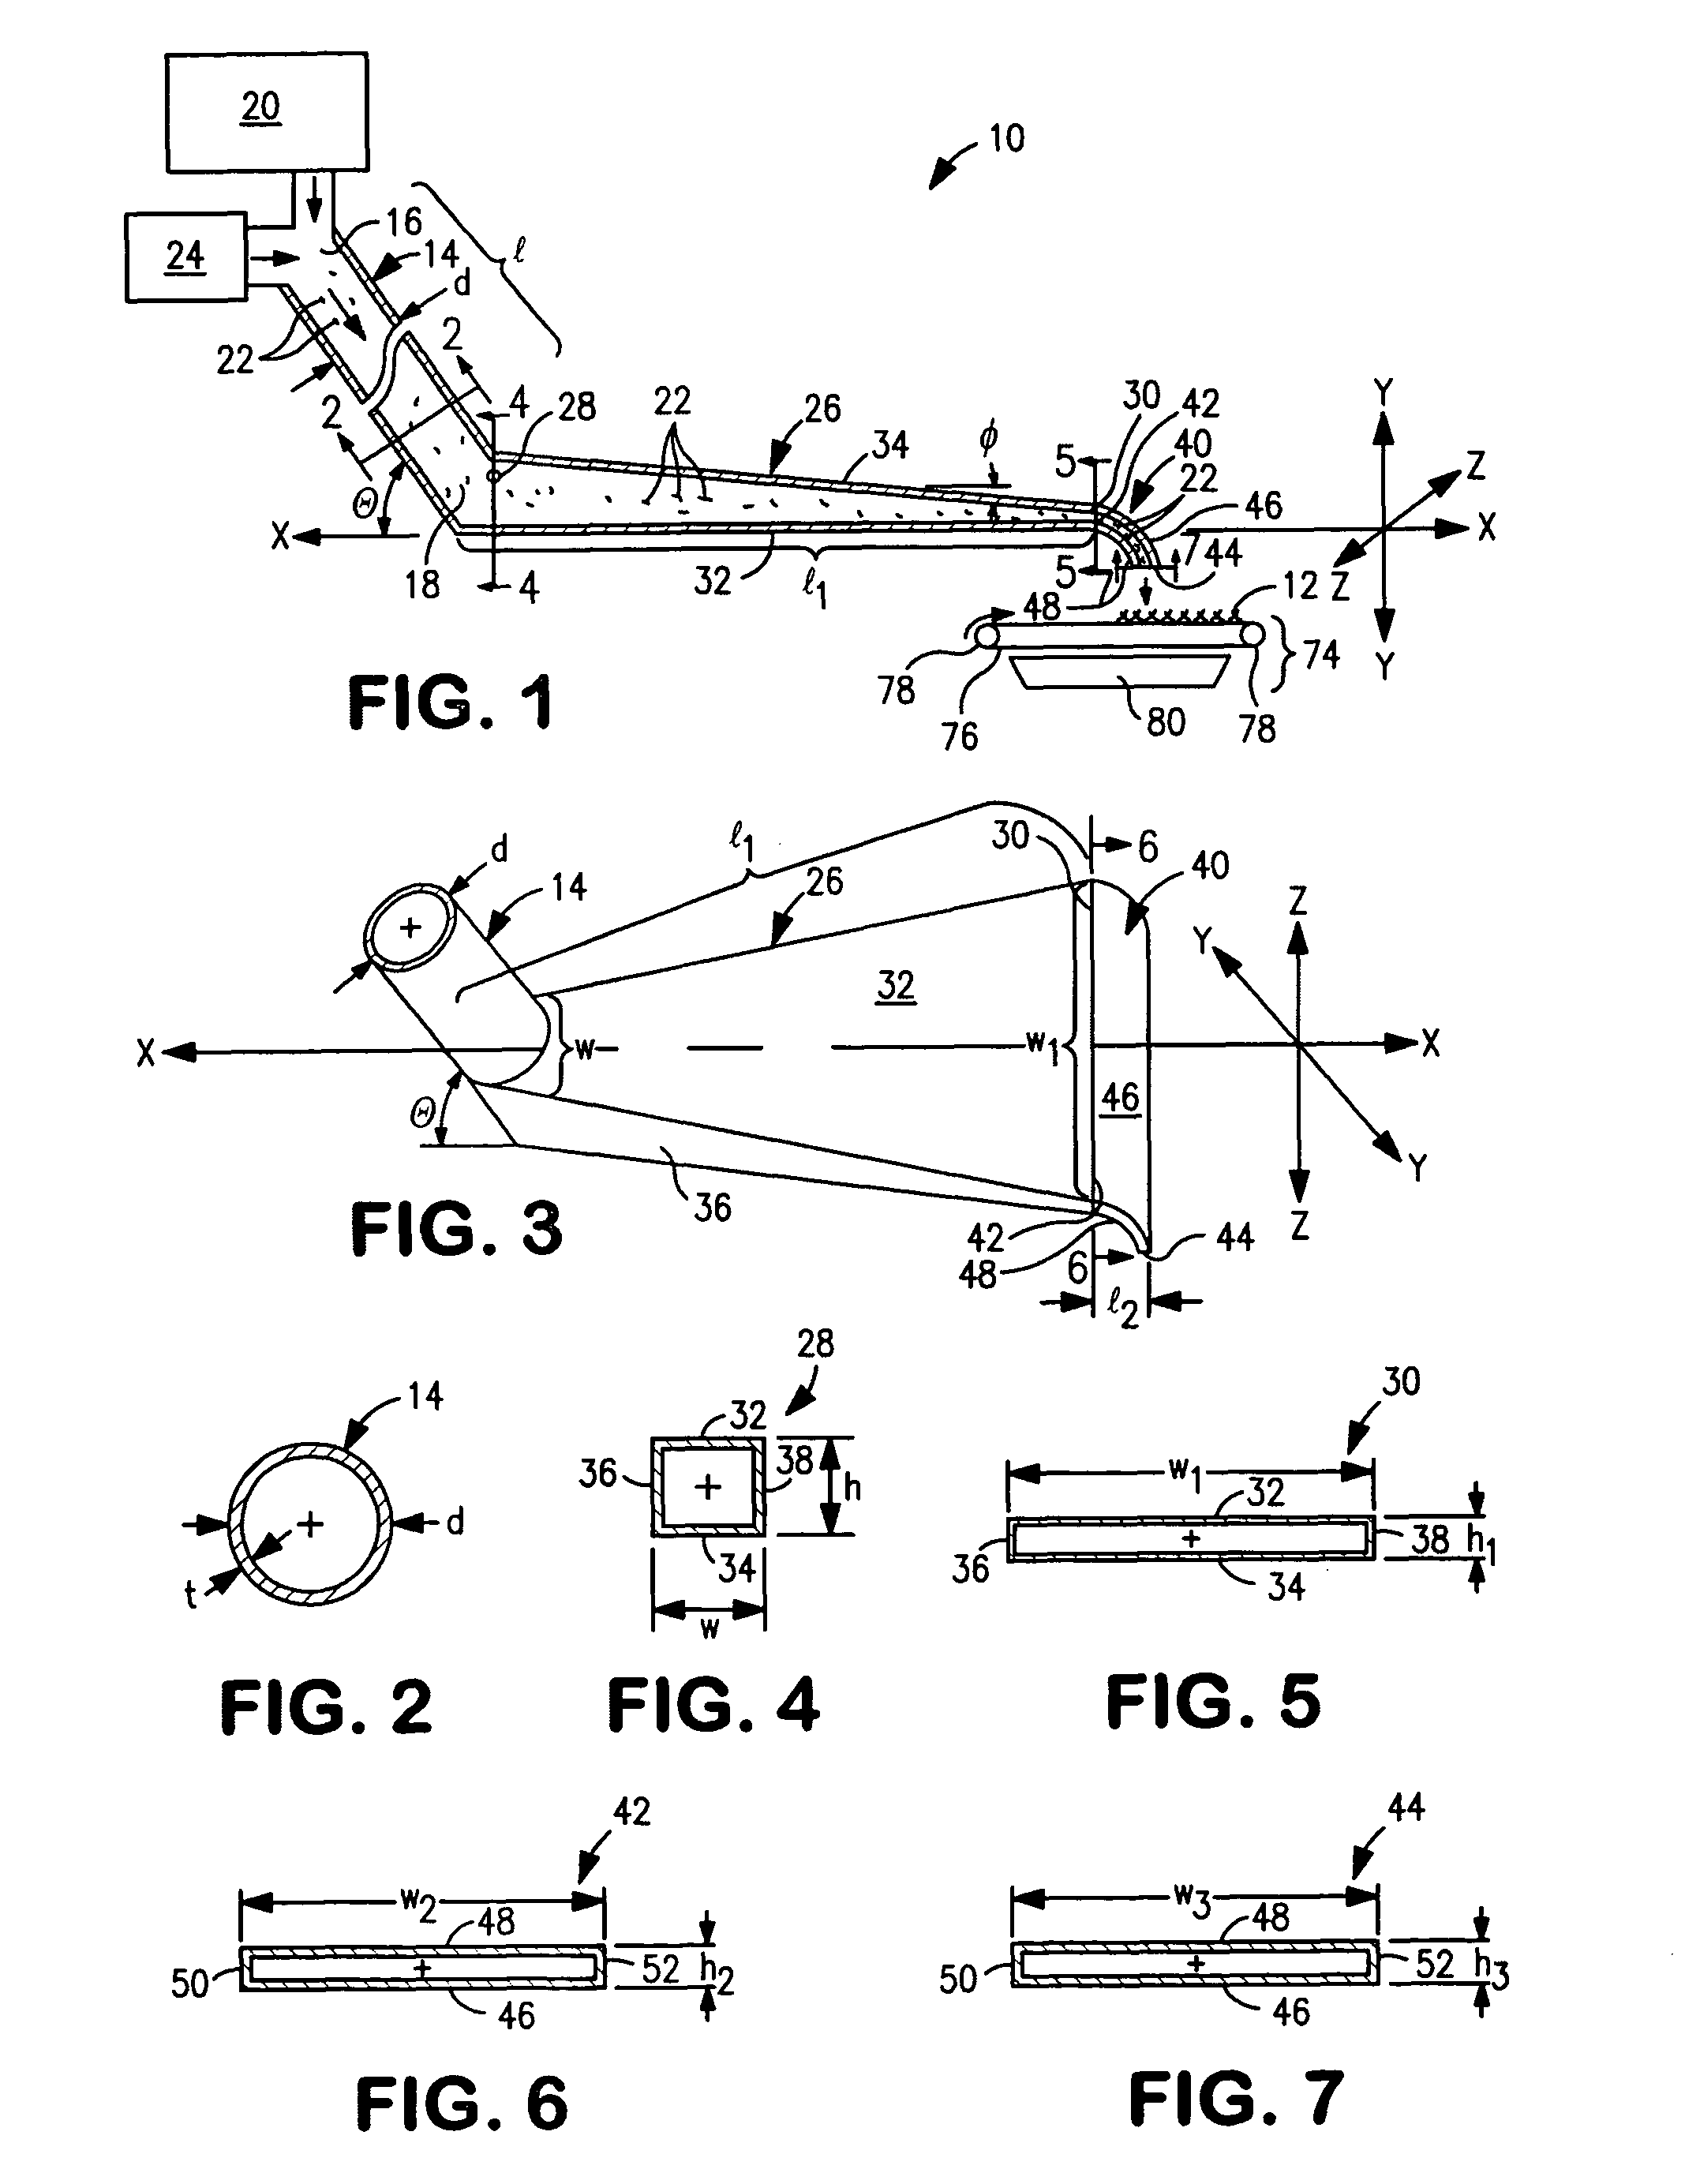 Apparatus and method for dry forming a uniform non-woven fibrous web